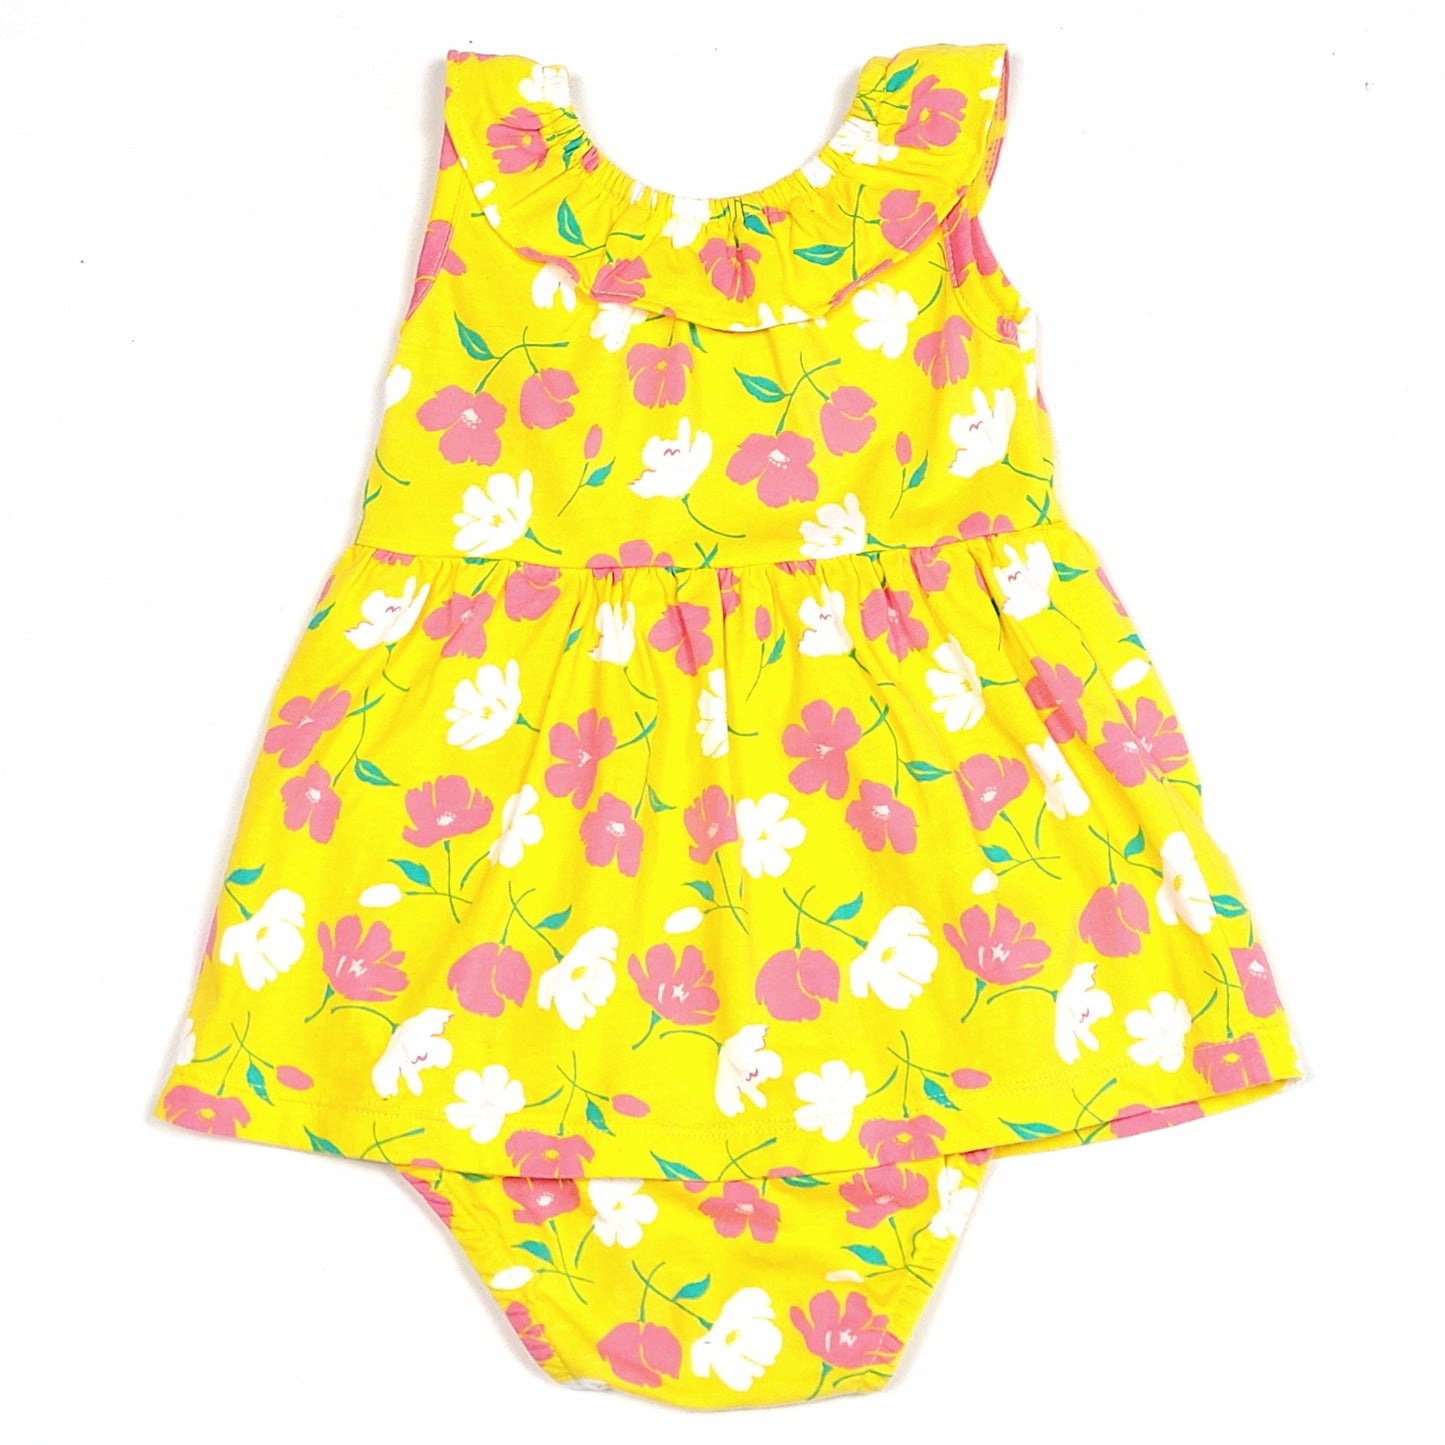 Carters Girls Yellow Floral Onesie Dress 18M Used View 2